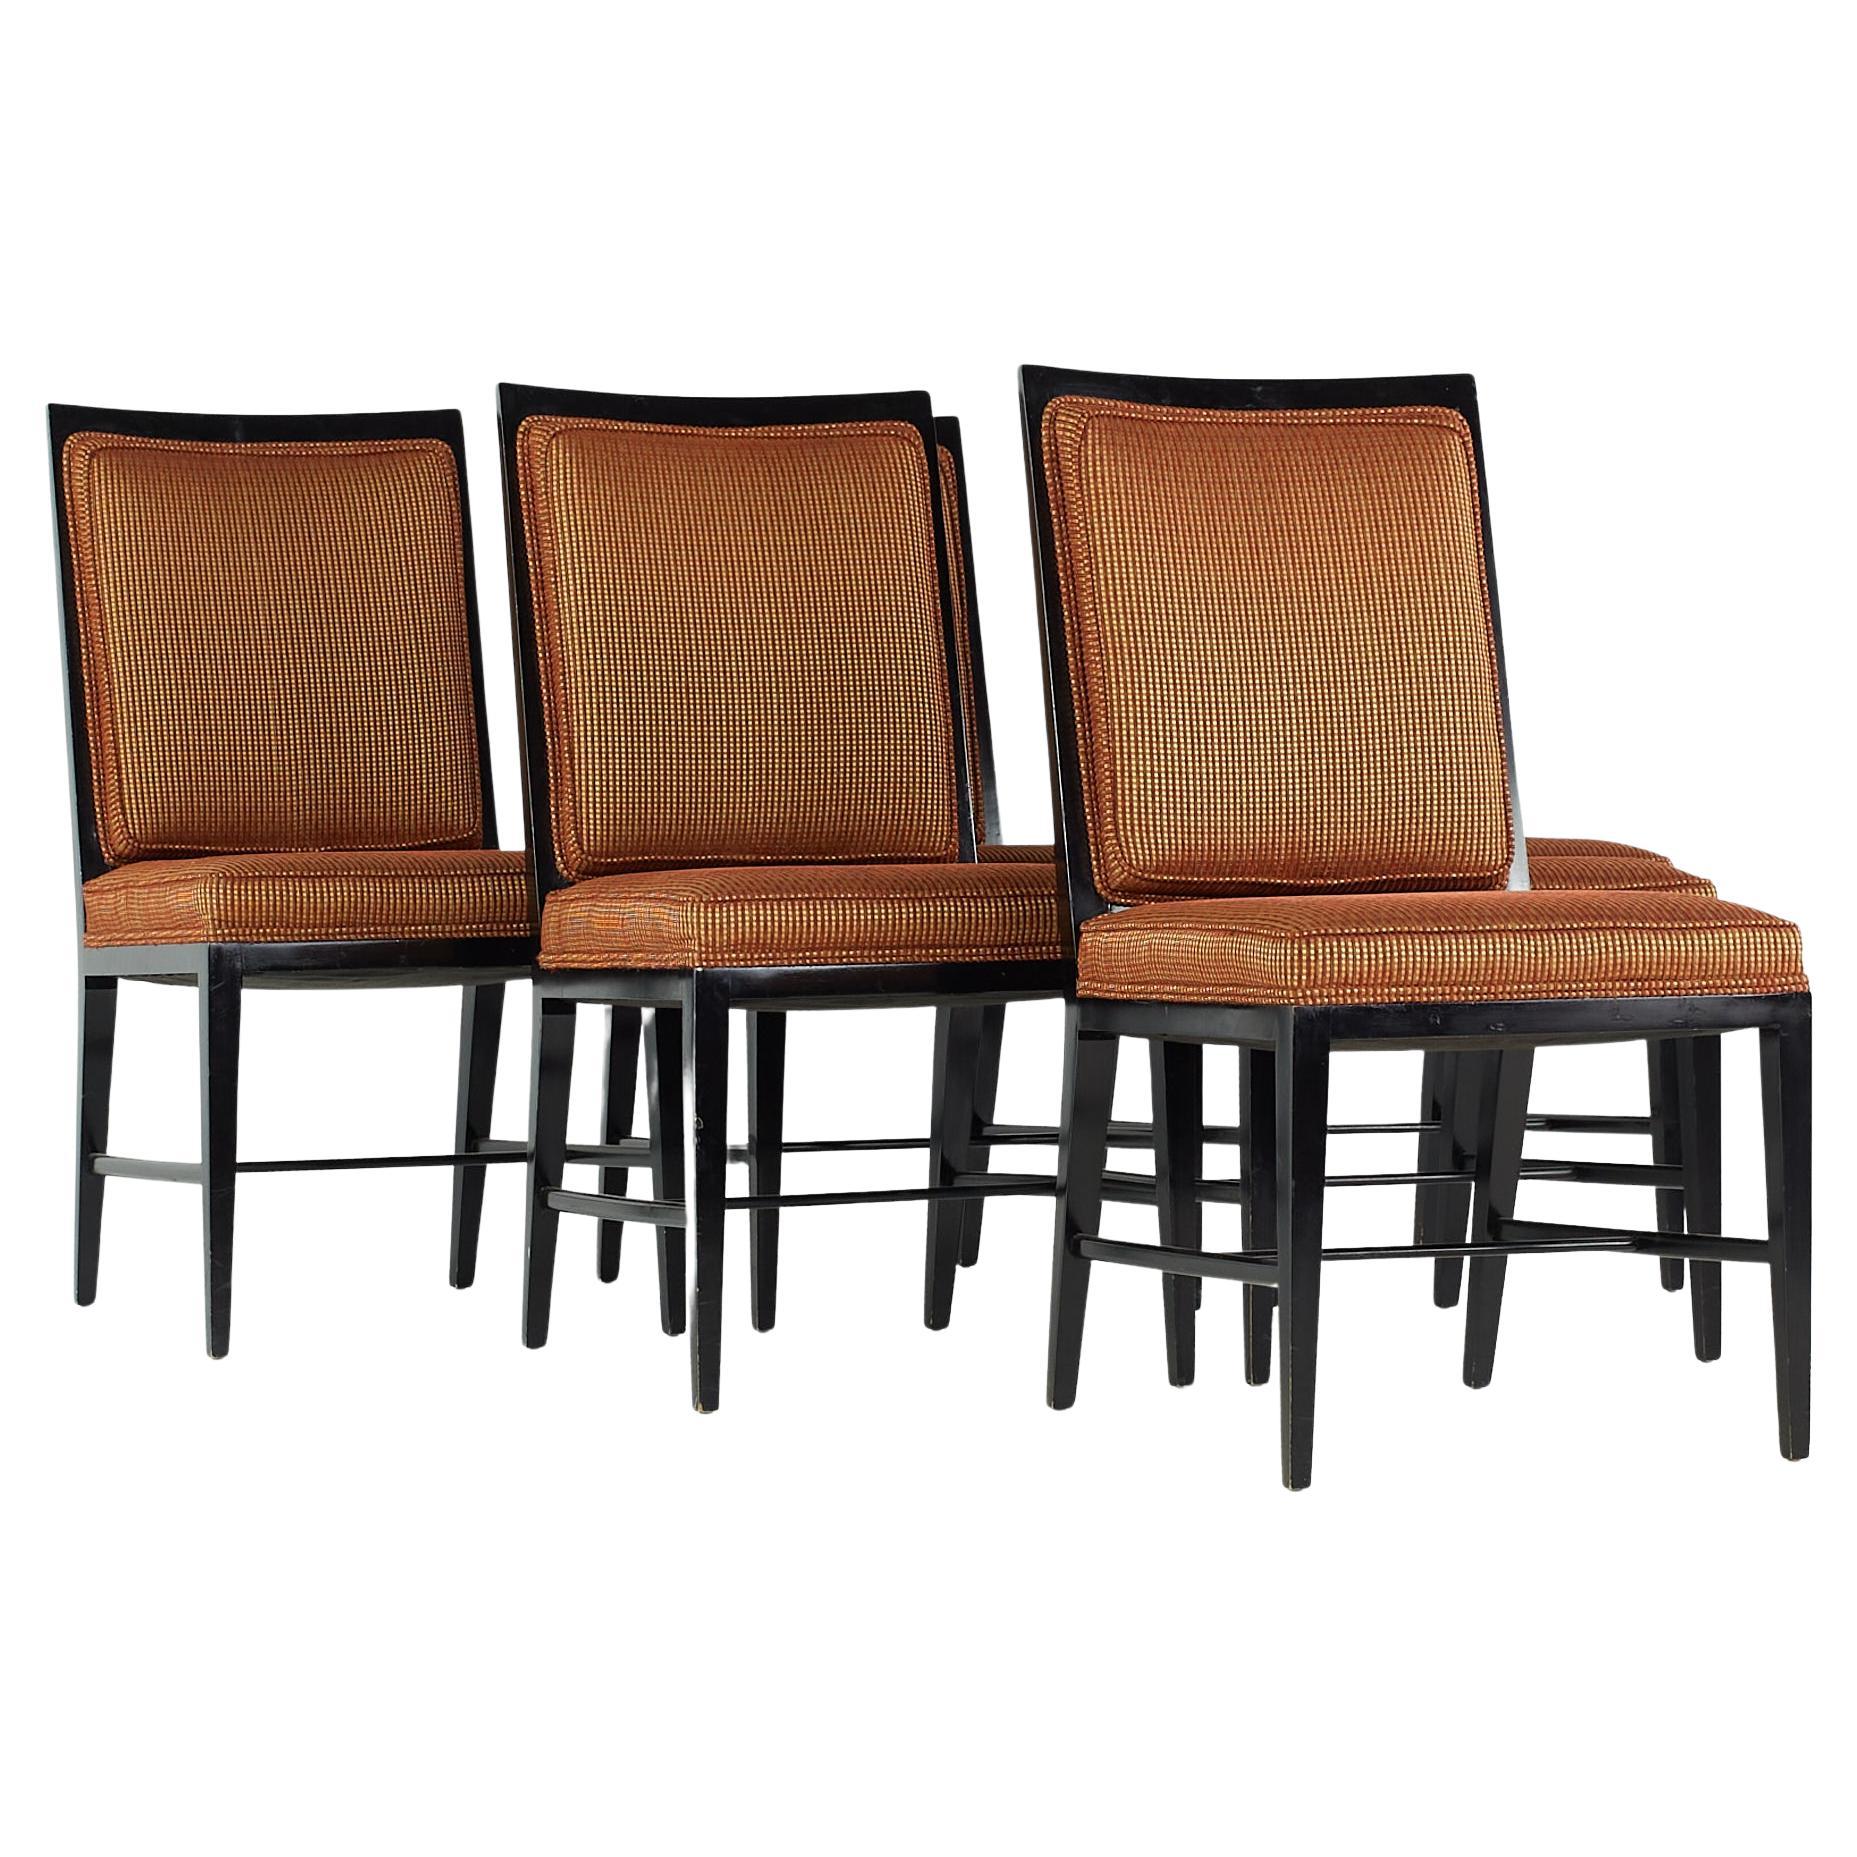 Paul McCobb Style Midcentury Ebonized Dining Chairs, Set of 6 For Sale